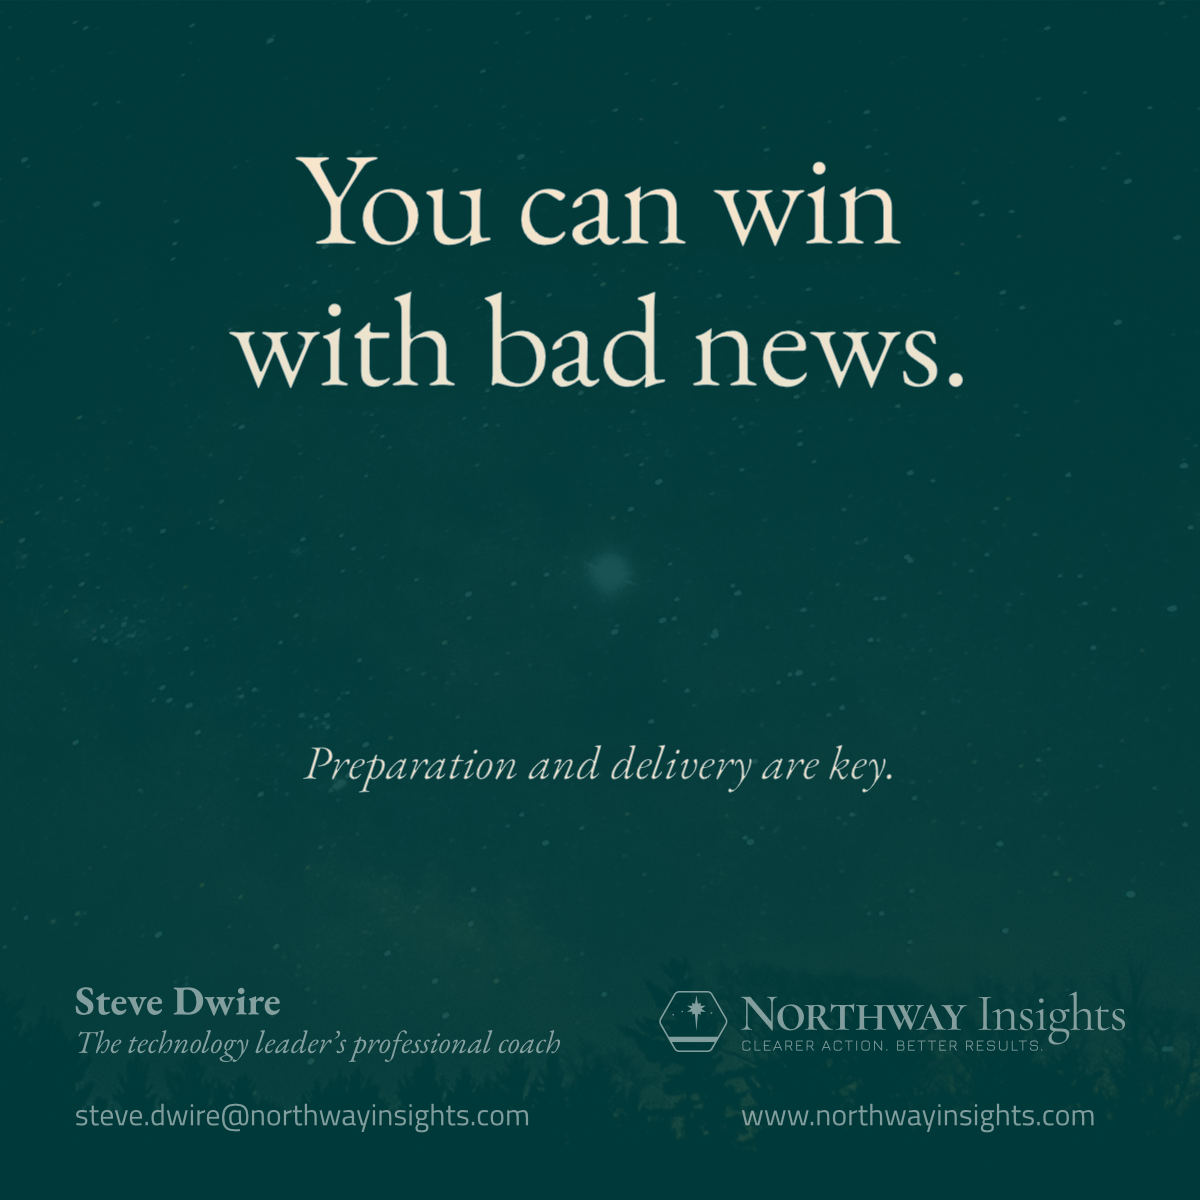 You can win with bad news.